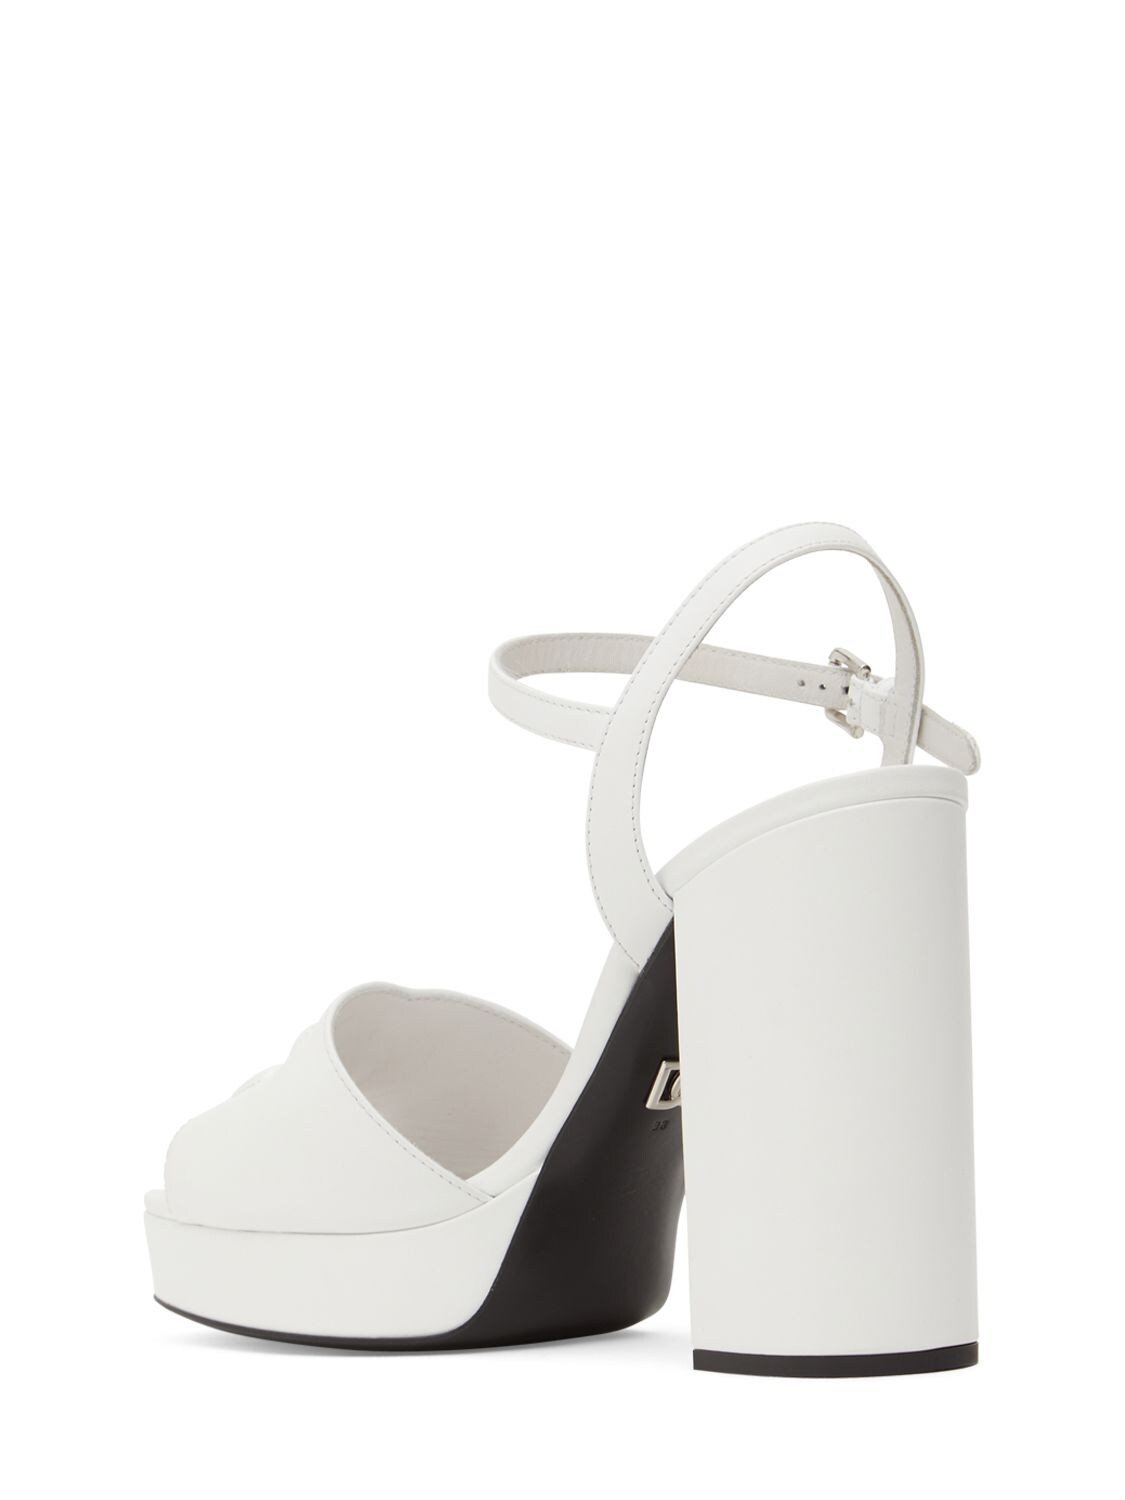 Shop Dolce & Gabbana 85mm Keira Leather High Heel Sandals In Off White